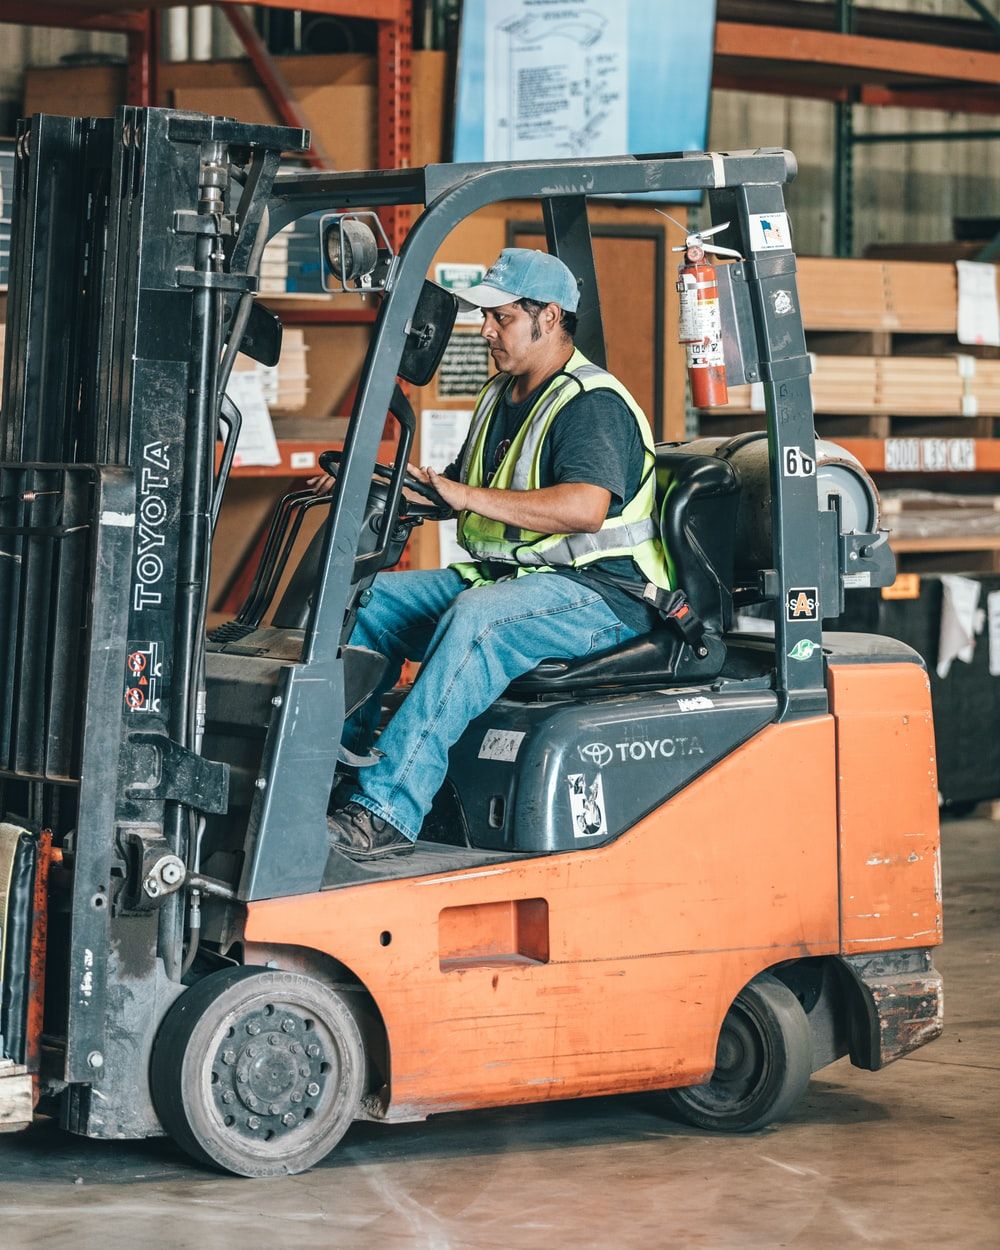 Lift Truck Picture. Download Free Image